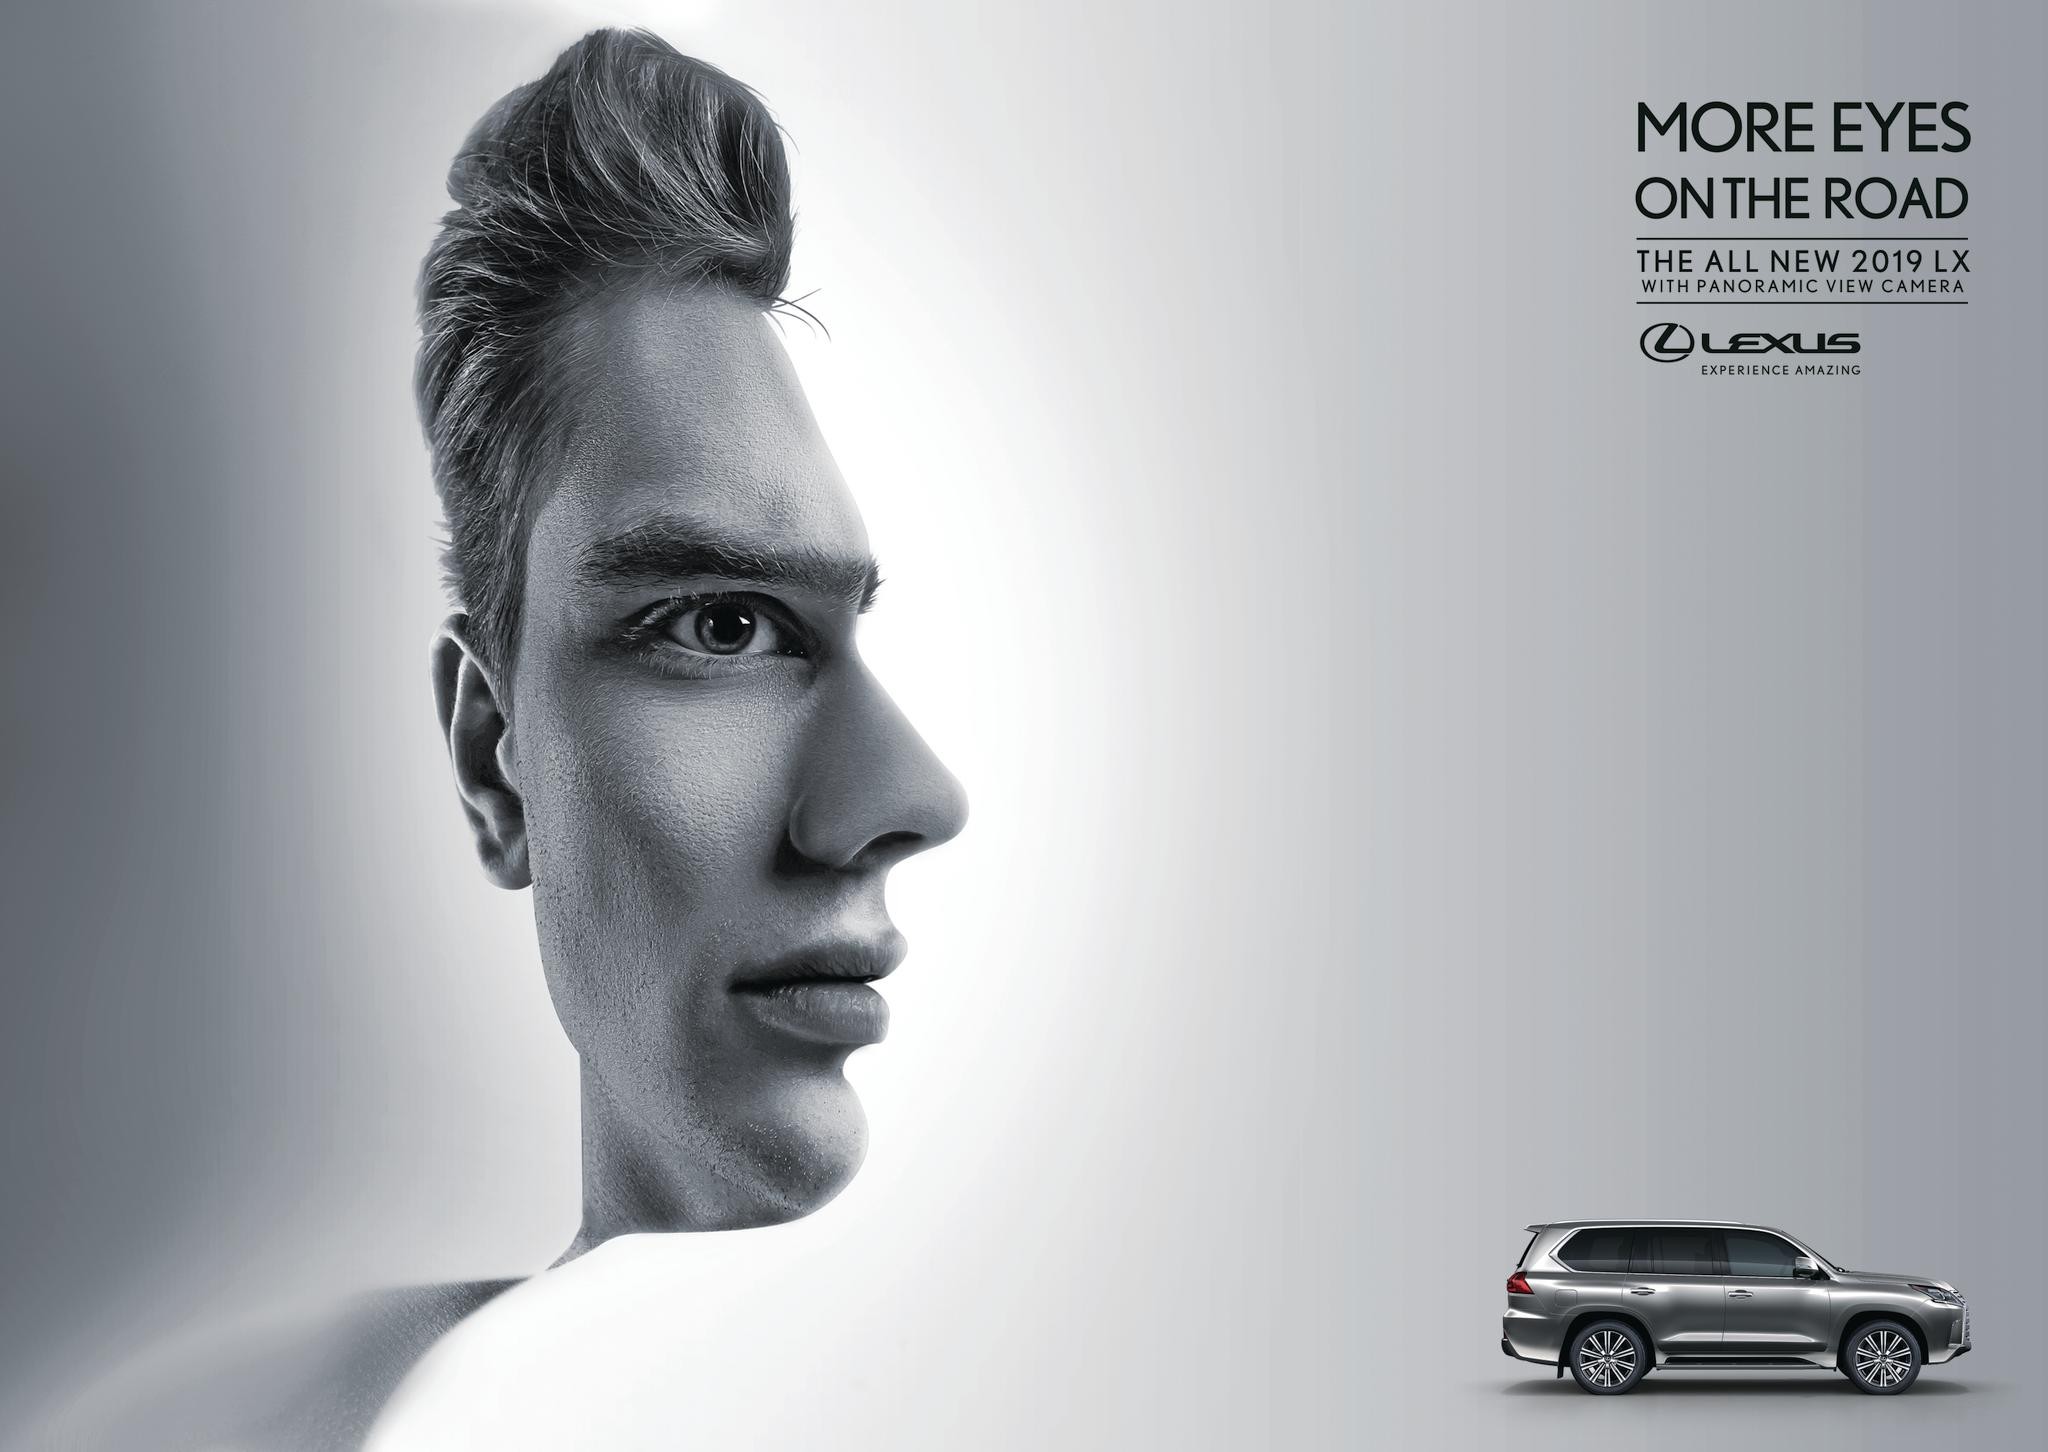 Lexus - More Eyes on the Road 